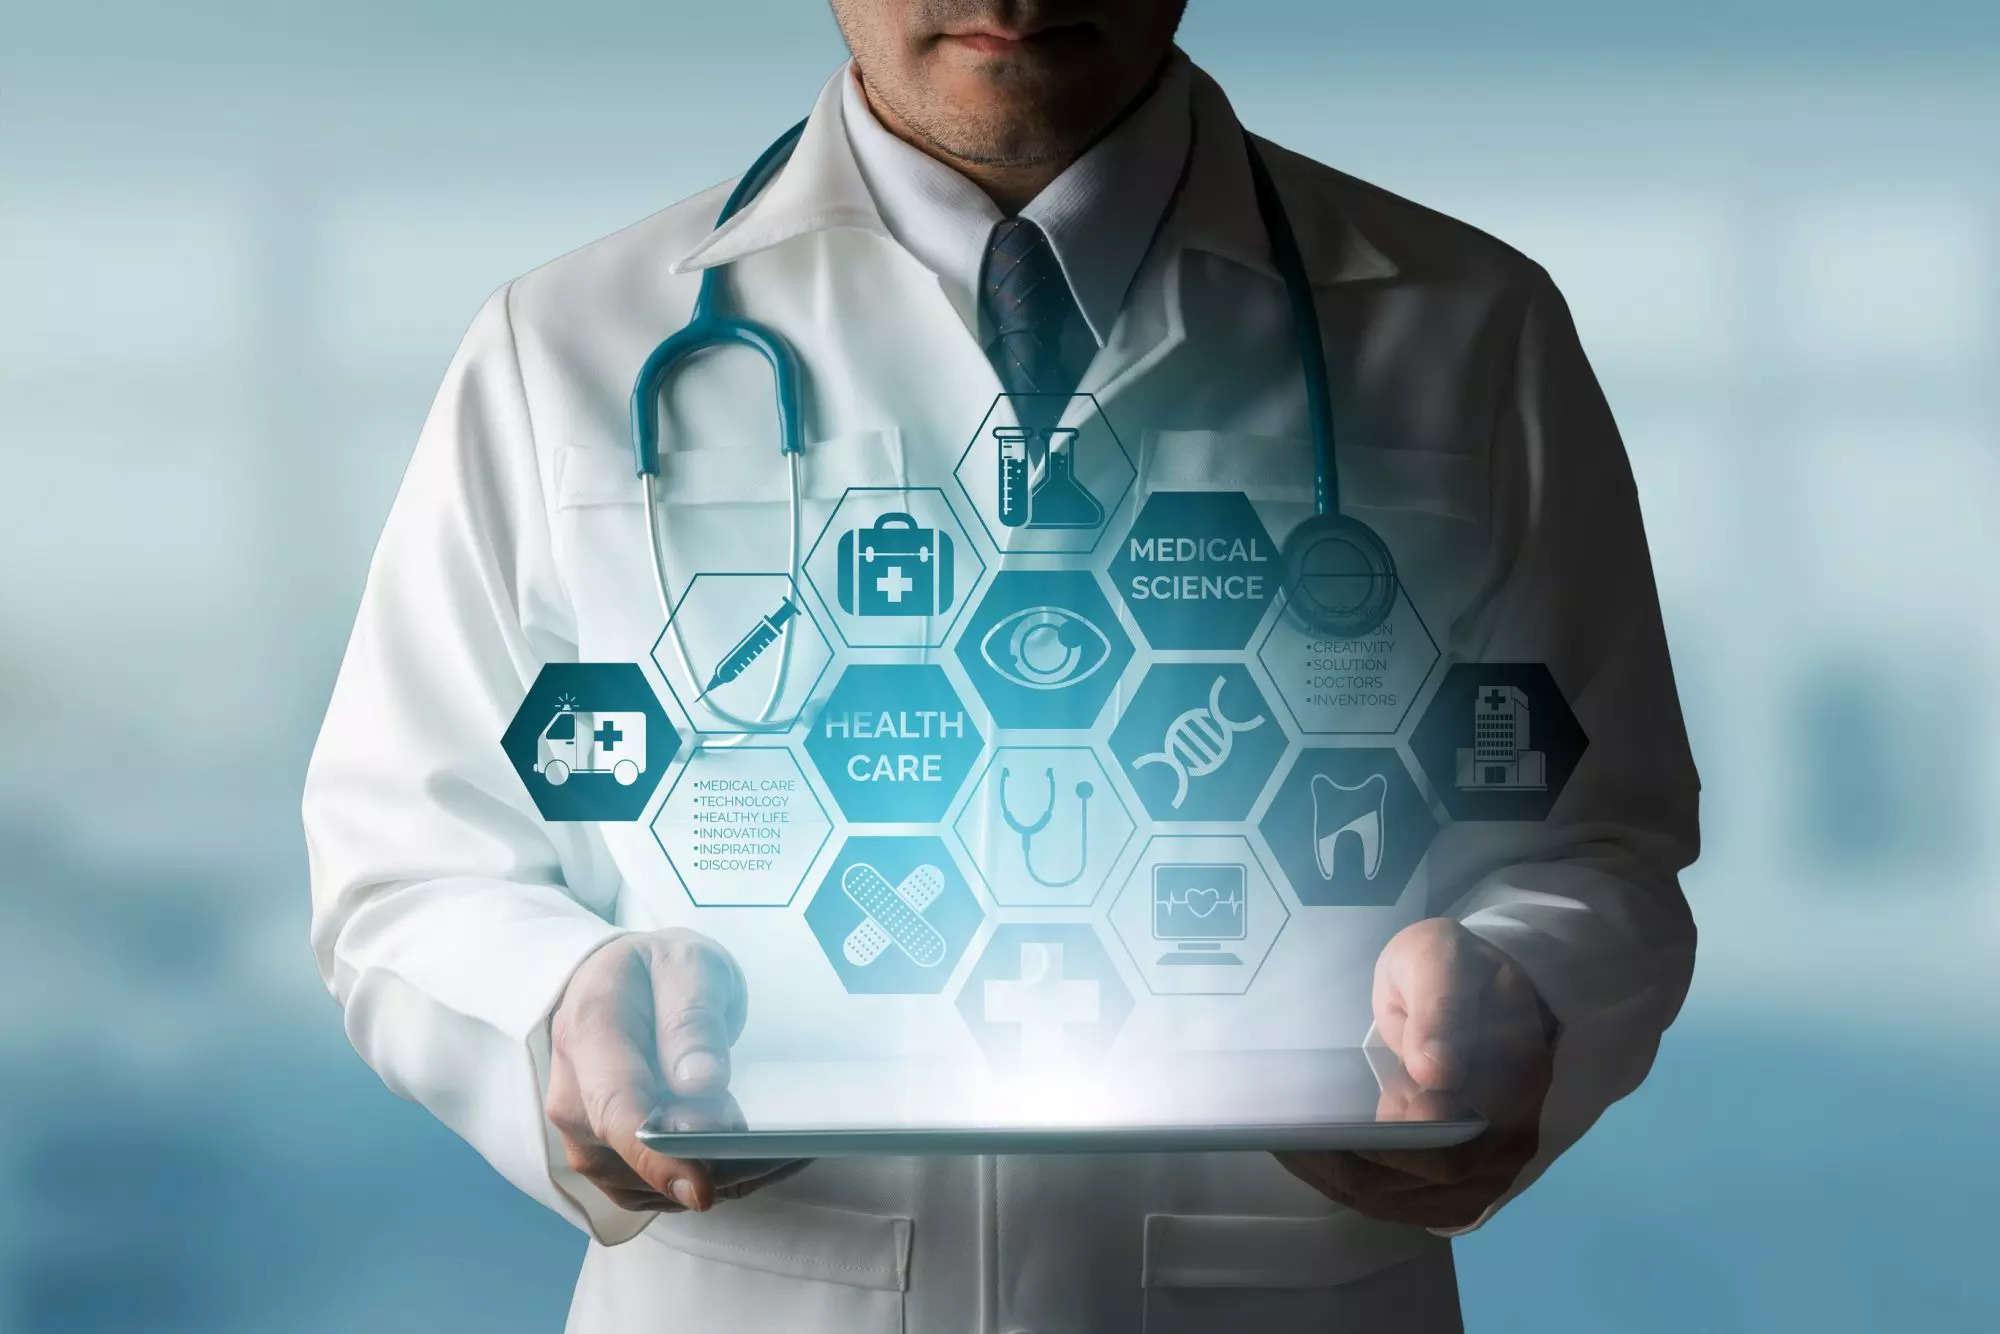 NASSCOM COE- IOT and AI launch third edition of Healthcare Innovation Challenge